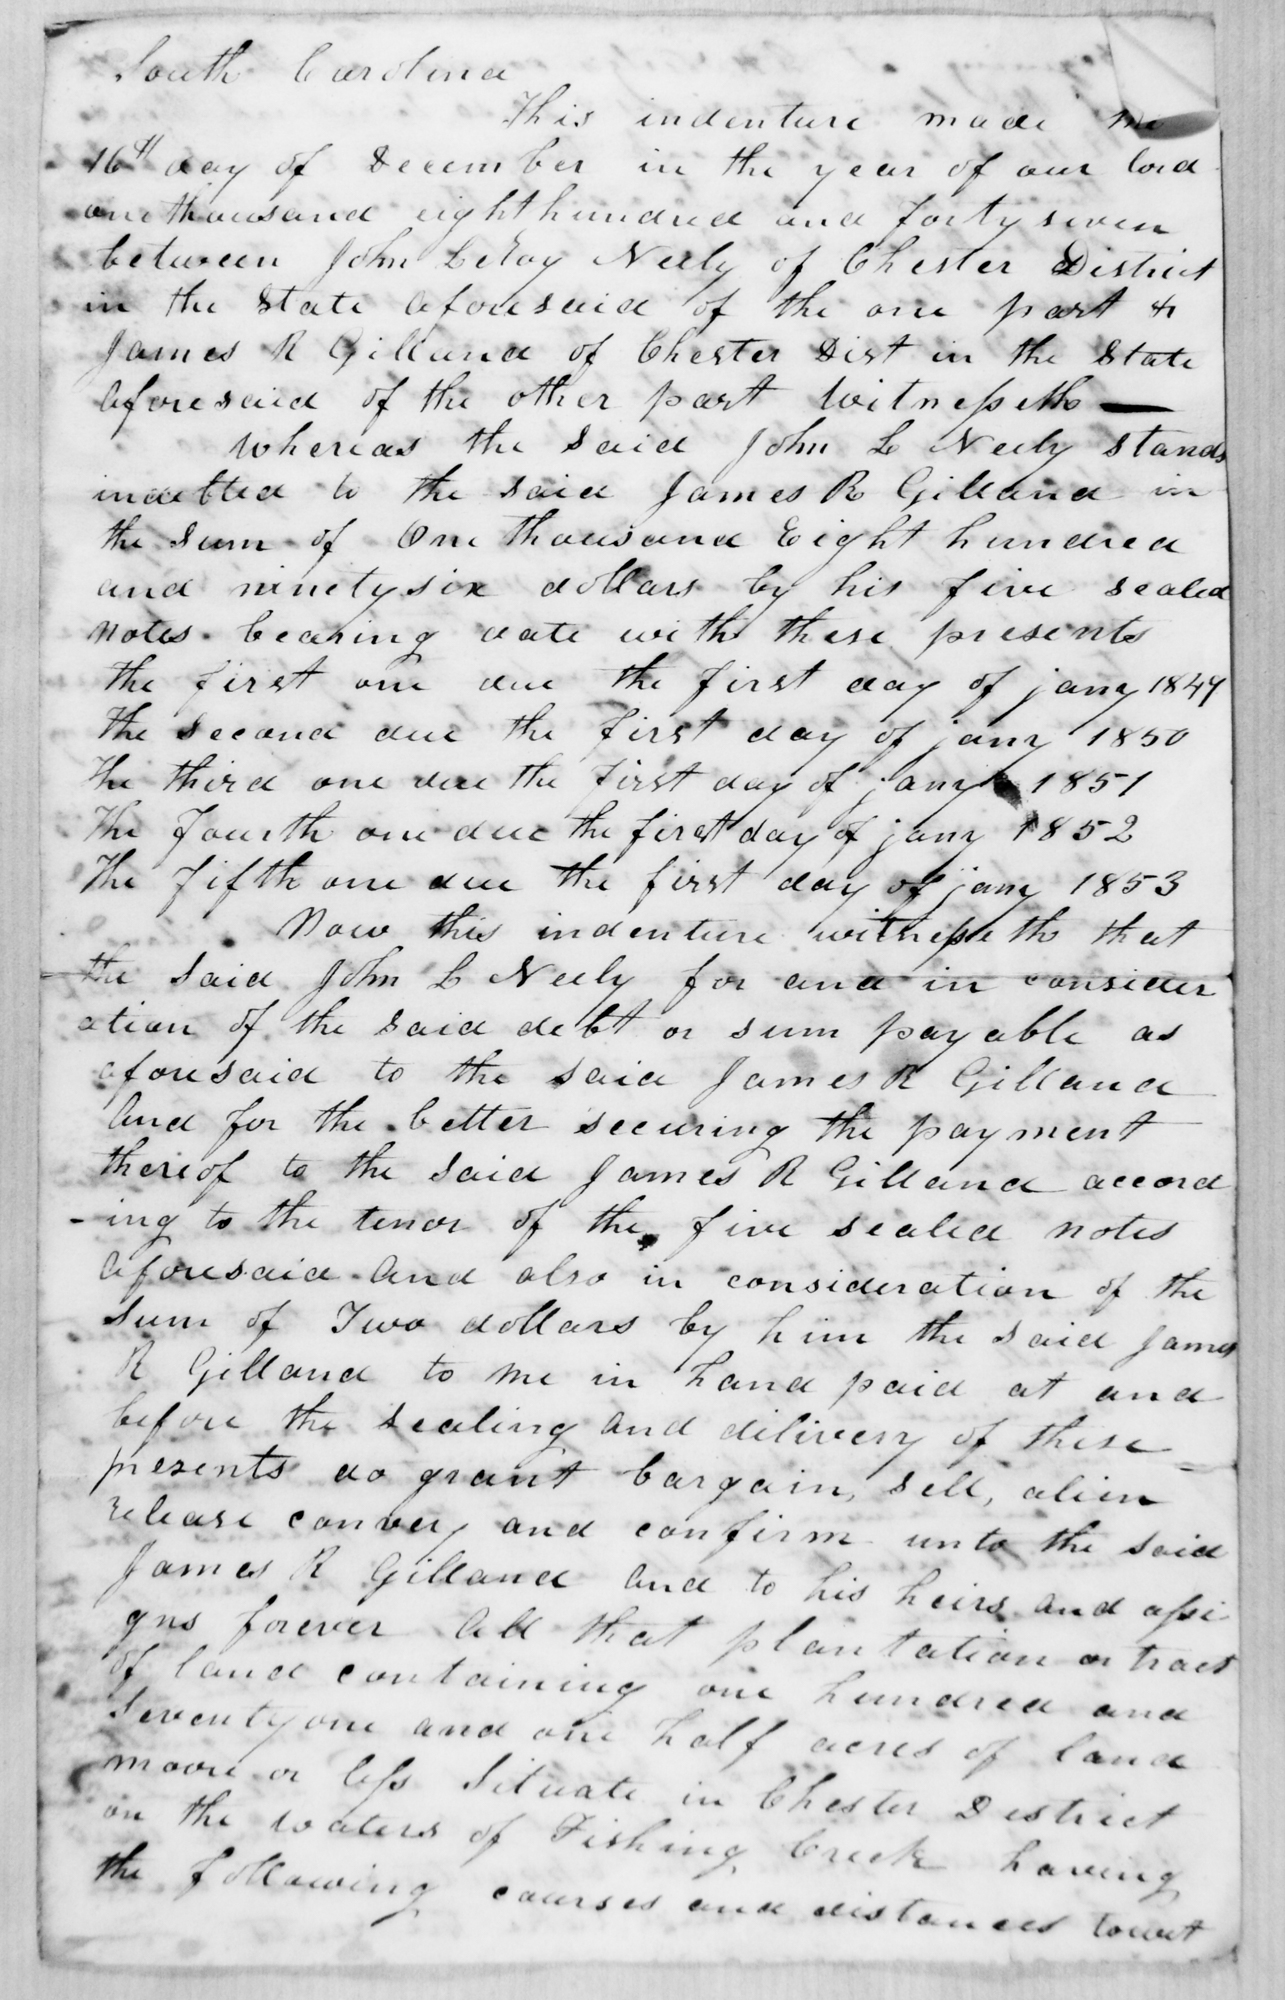 Note of debt from John Leroy Neely to James R. Gilland of Chester Co., 